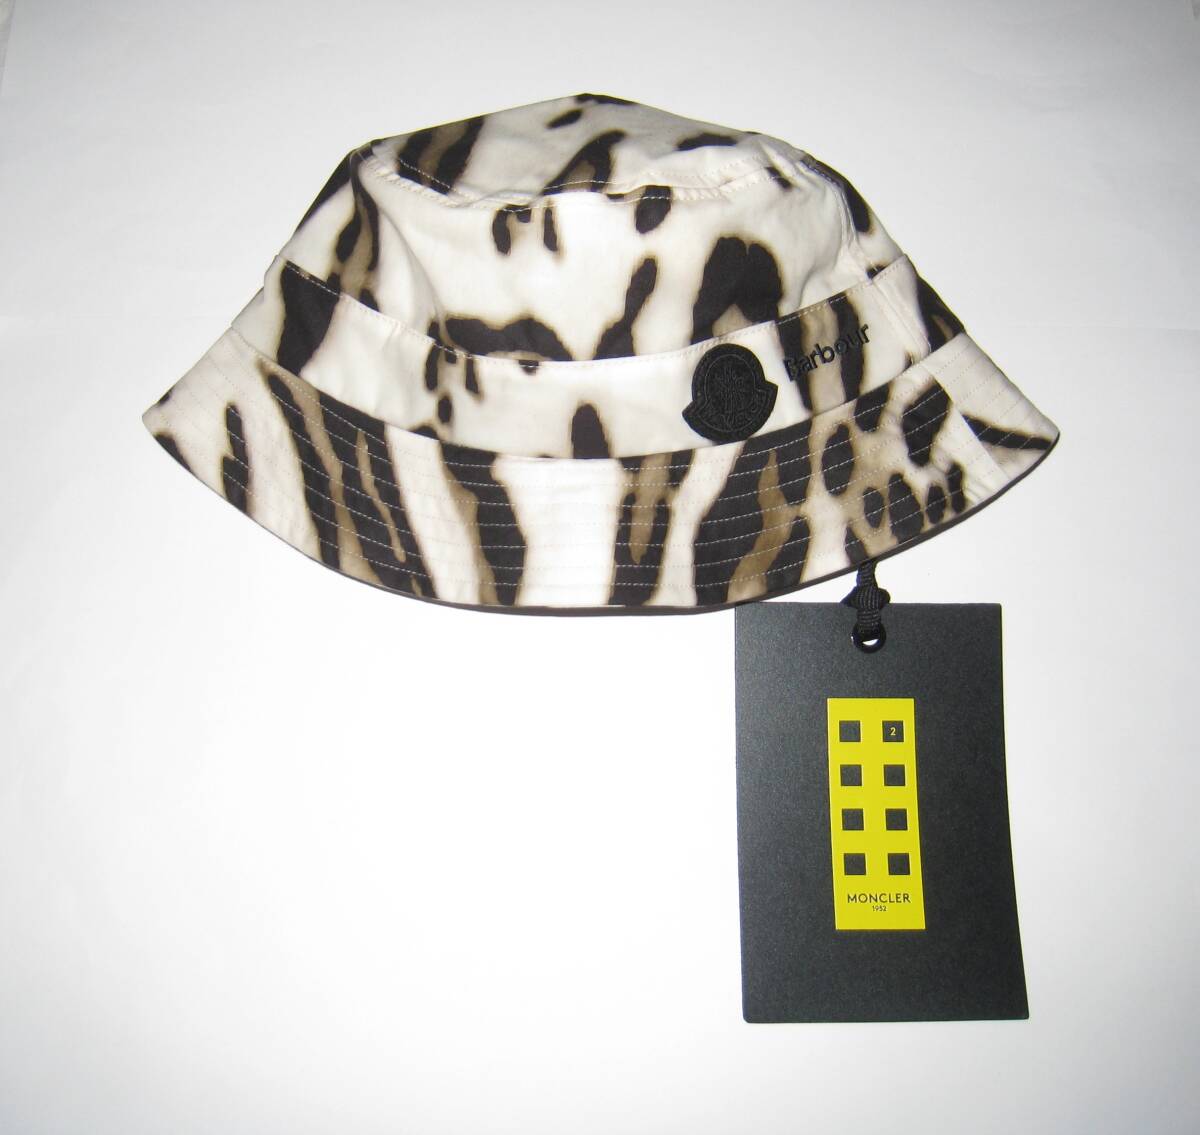 MONCLER GENIUS 7 MONCLER x Barbour Bucket Hat Leopard / モンクレール バブアー バケットハット L レオパード 新品 正規の画像4